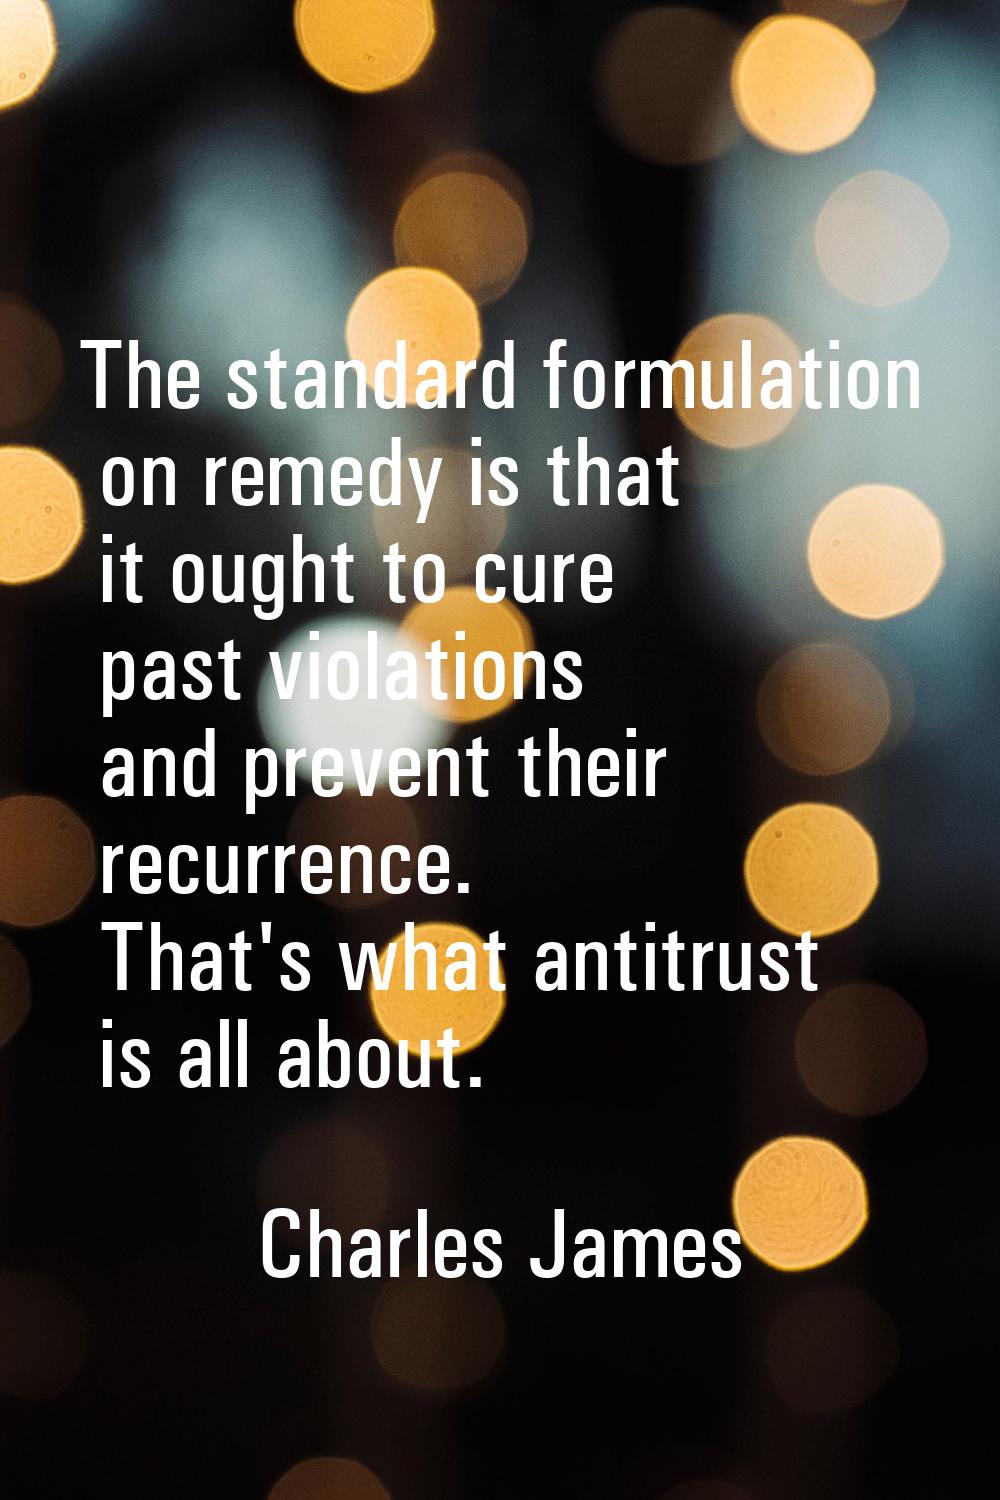 The standard formulation on remedy is that it ought to cure past violations and prevent their recur